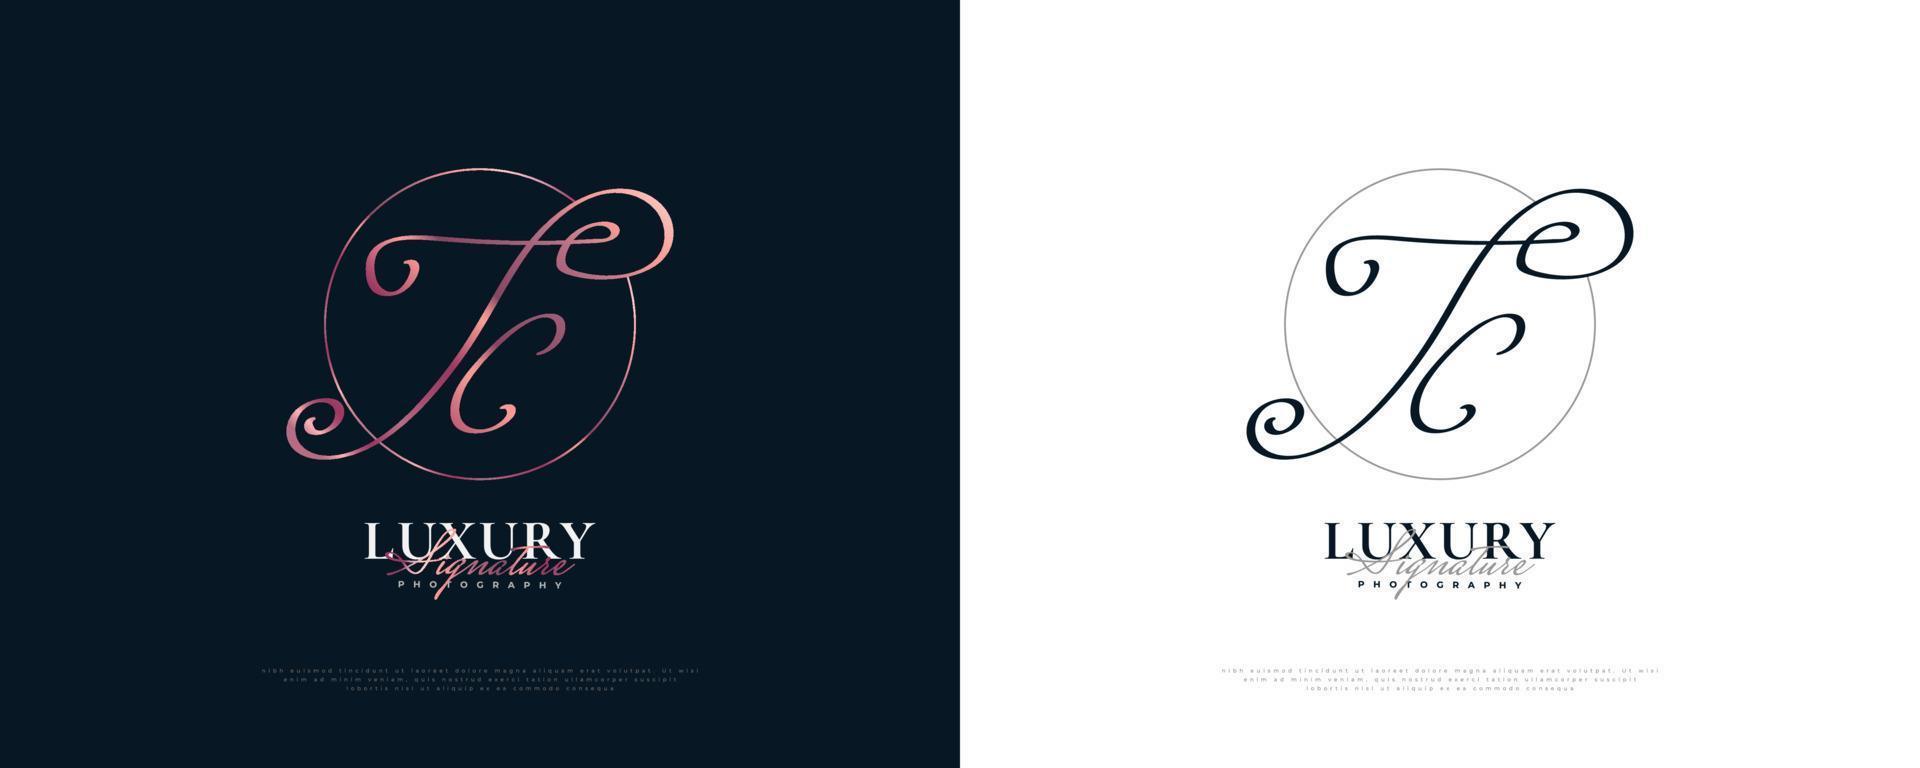 JC Initial Signature Logo Design with Elegant and Minimalist Handwriting Style. Initial J and C Logo Design for Wedding, Fashion, Jewelry, Boutique and Business Brand Identity vector